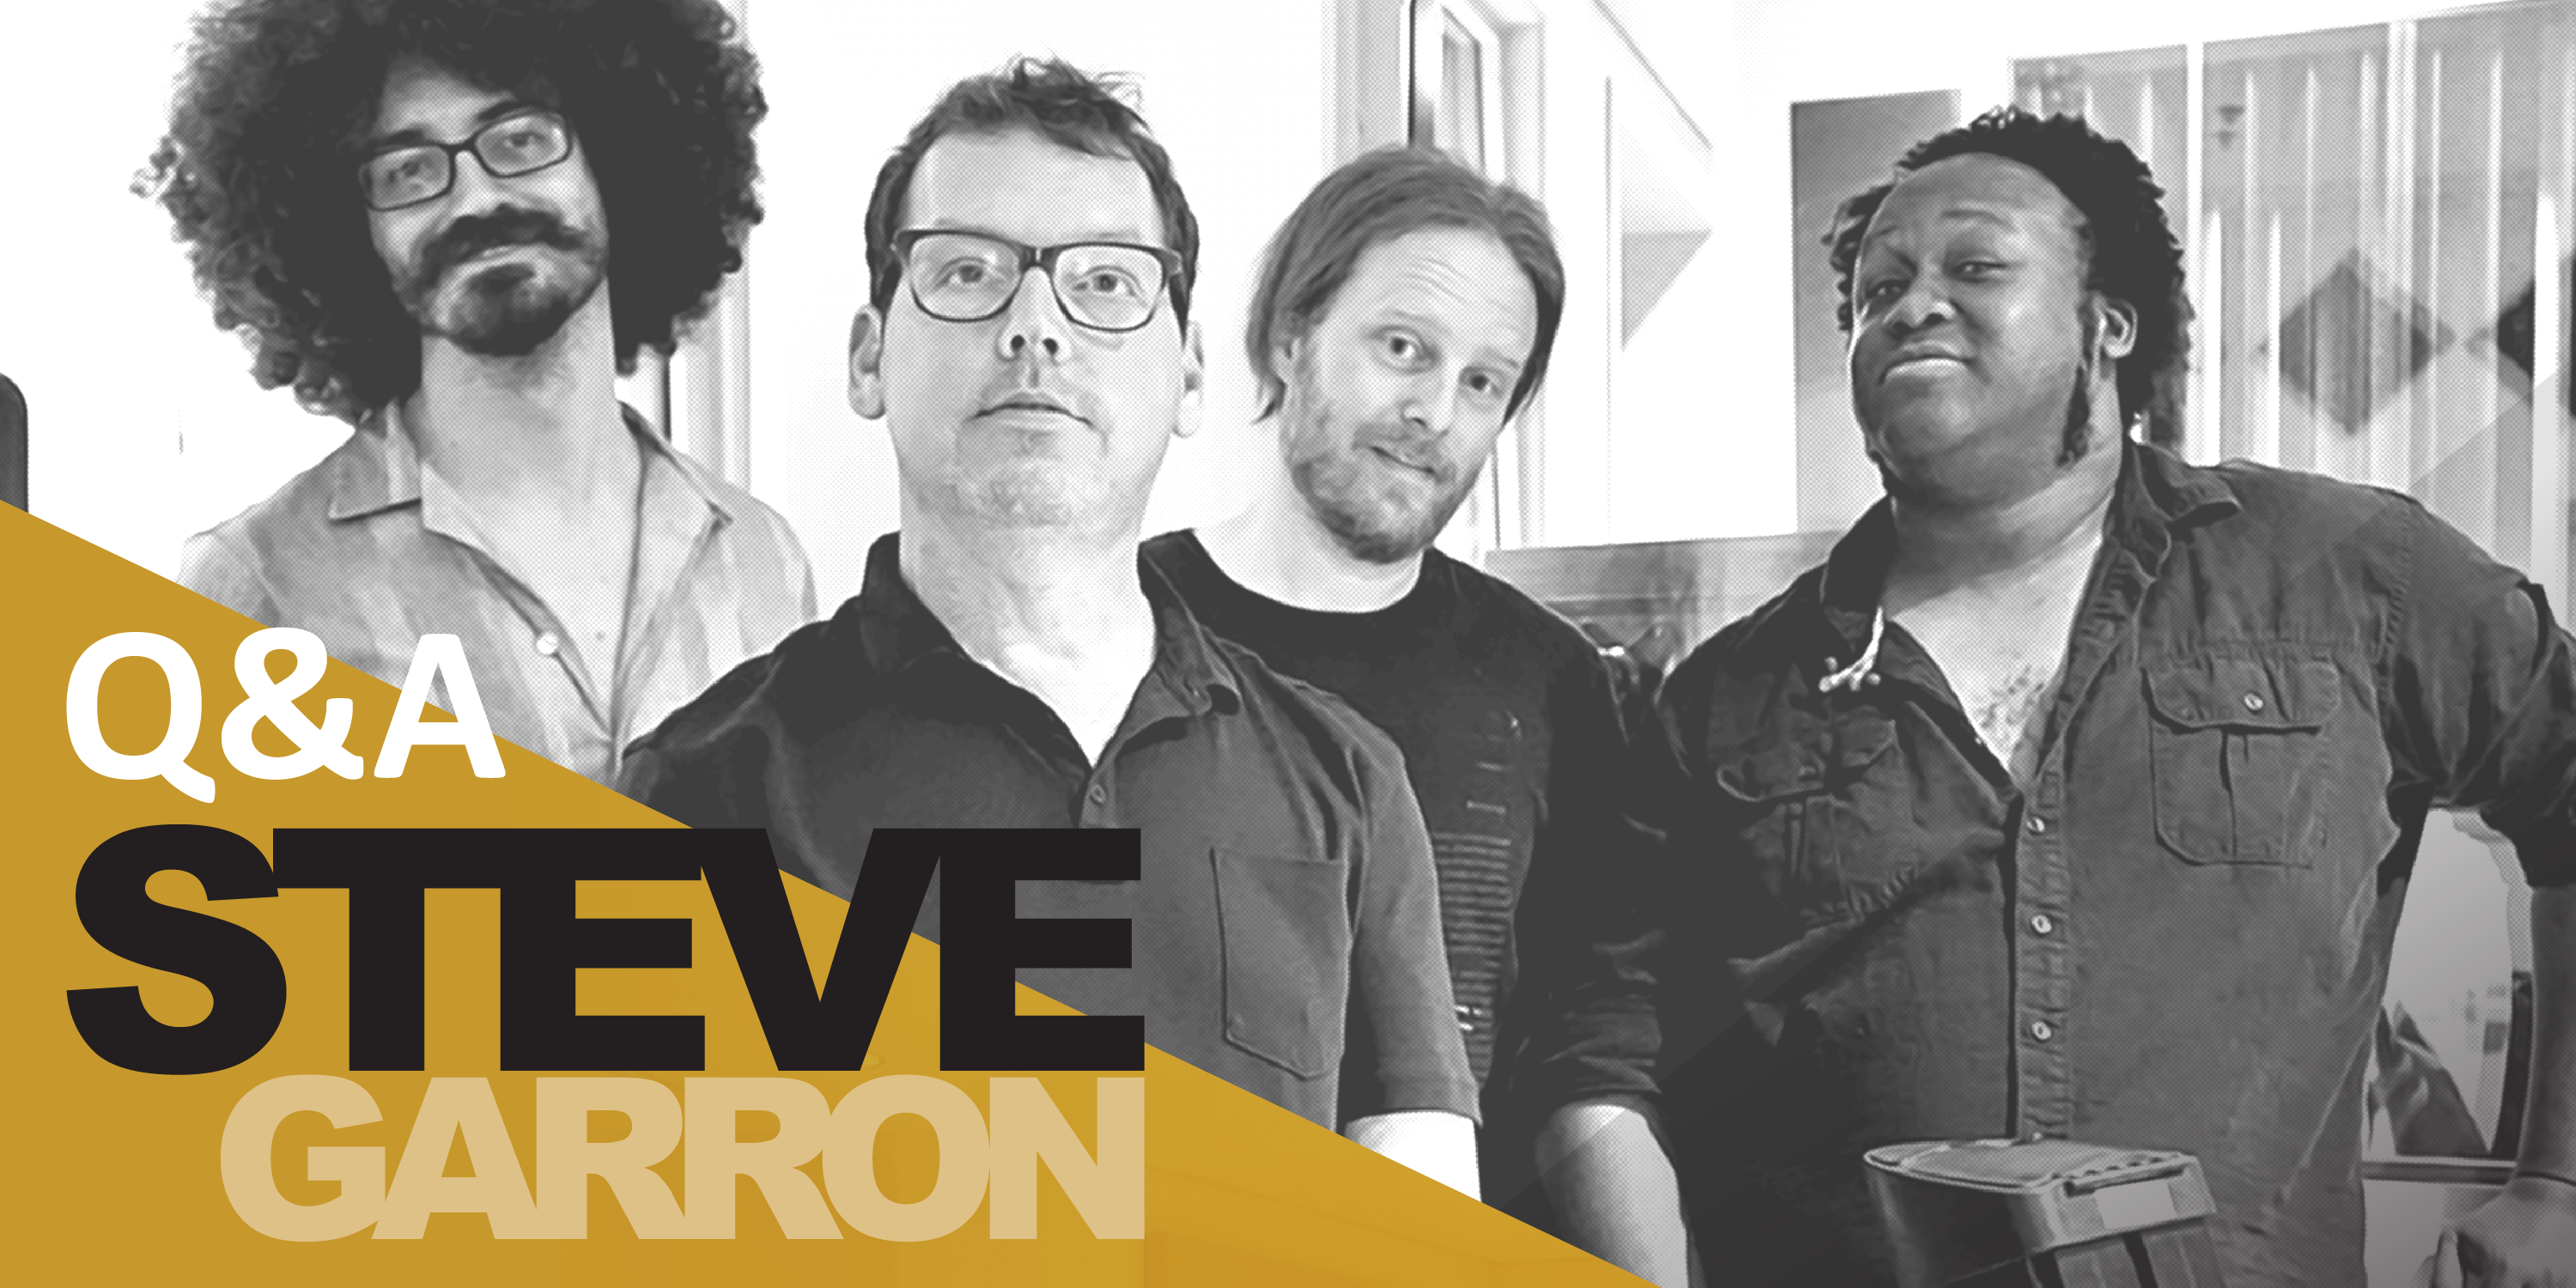 Melrose in the Mix: Q&A with Steven Garron